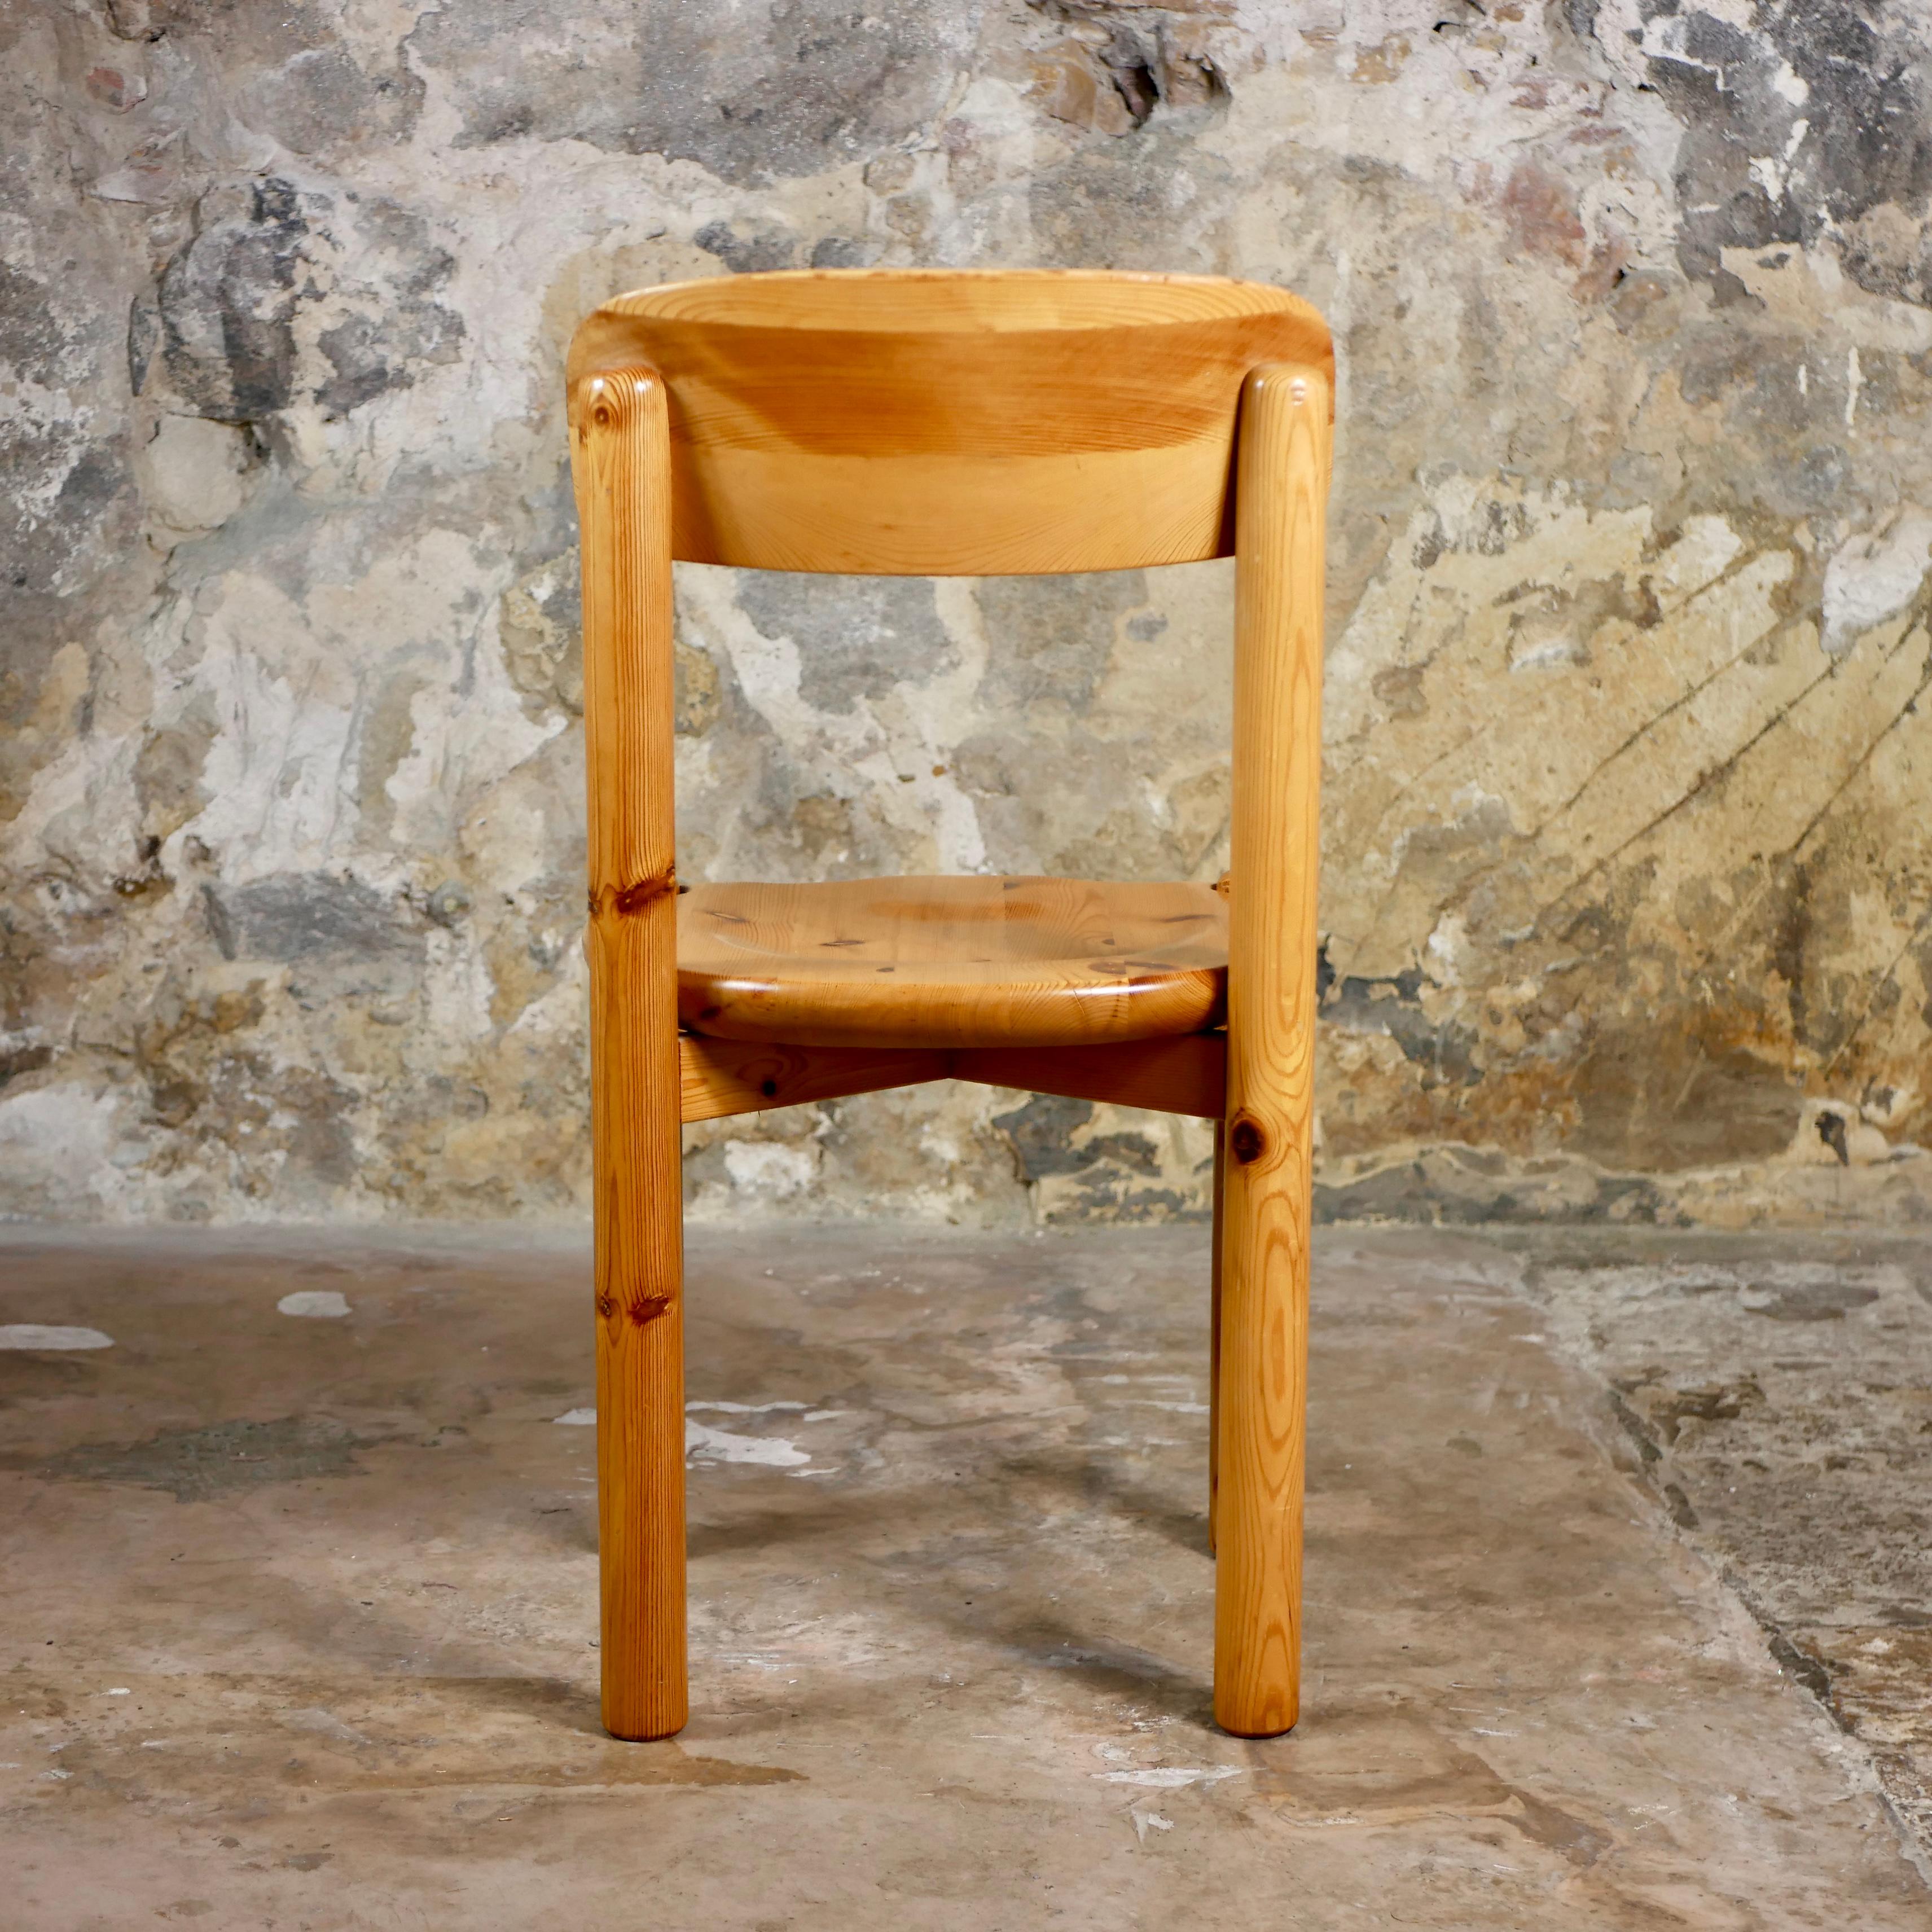 Set of 6 pine chairs by Rainer Daumiller for Hirsthals Savvaerk, Denmark, 1960s For Sale 7